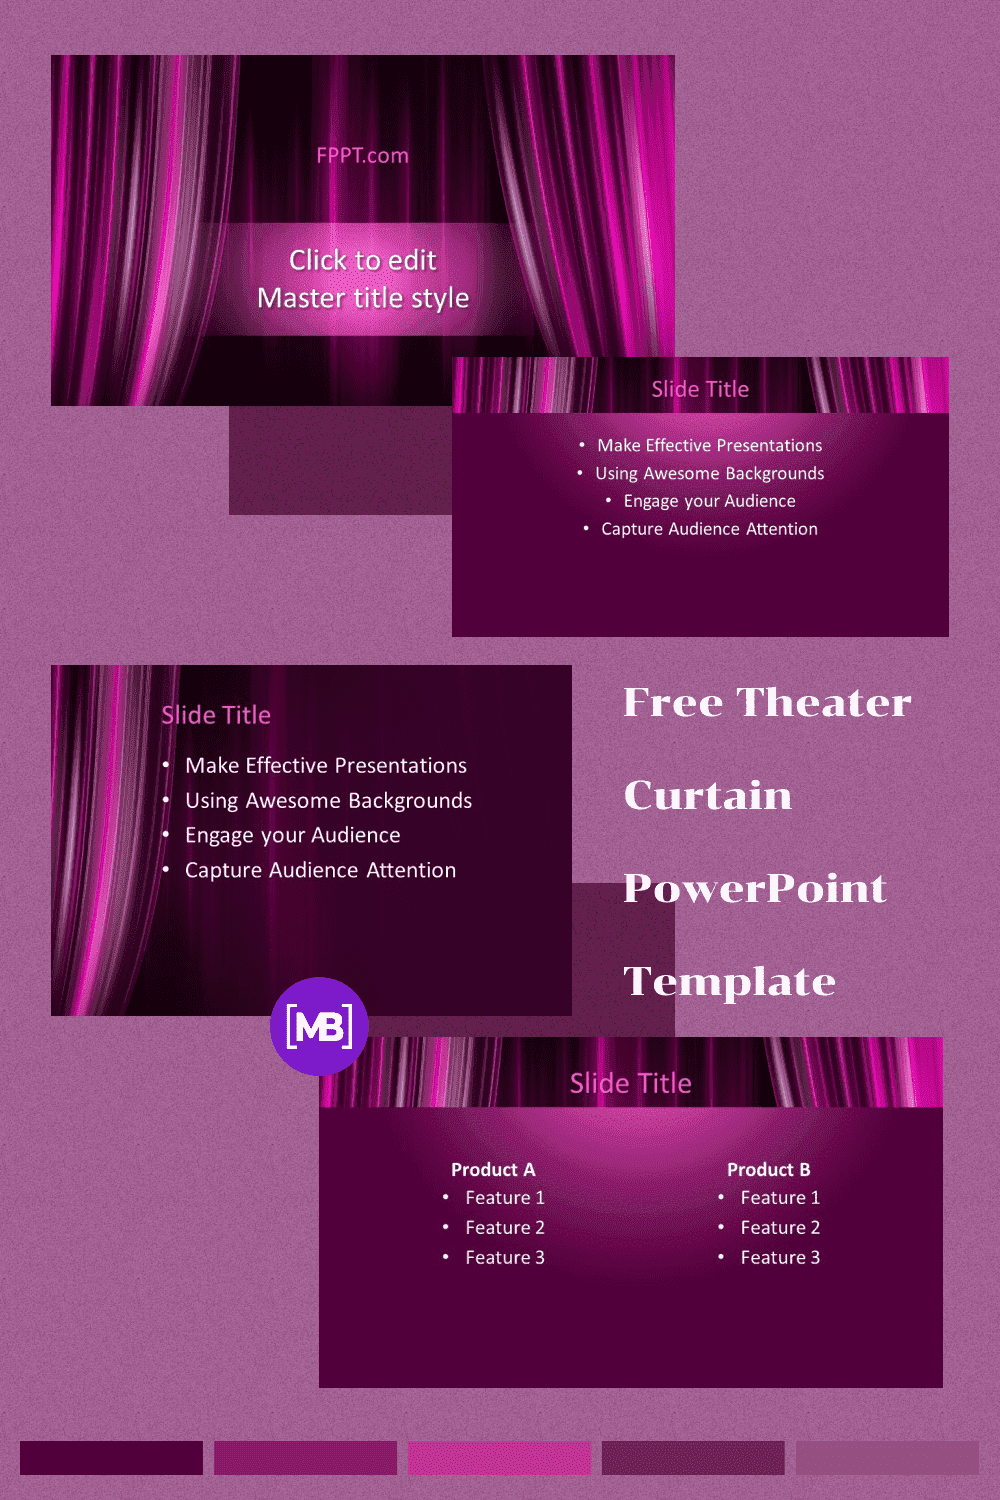 Theater curtain powerpoint template.